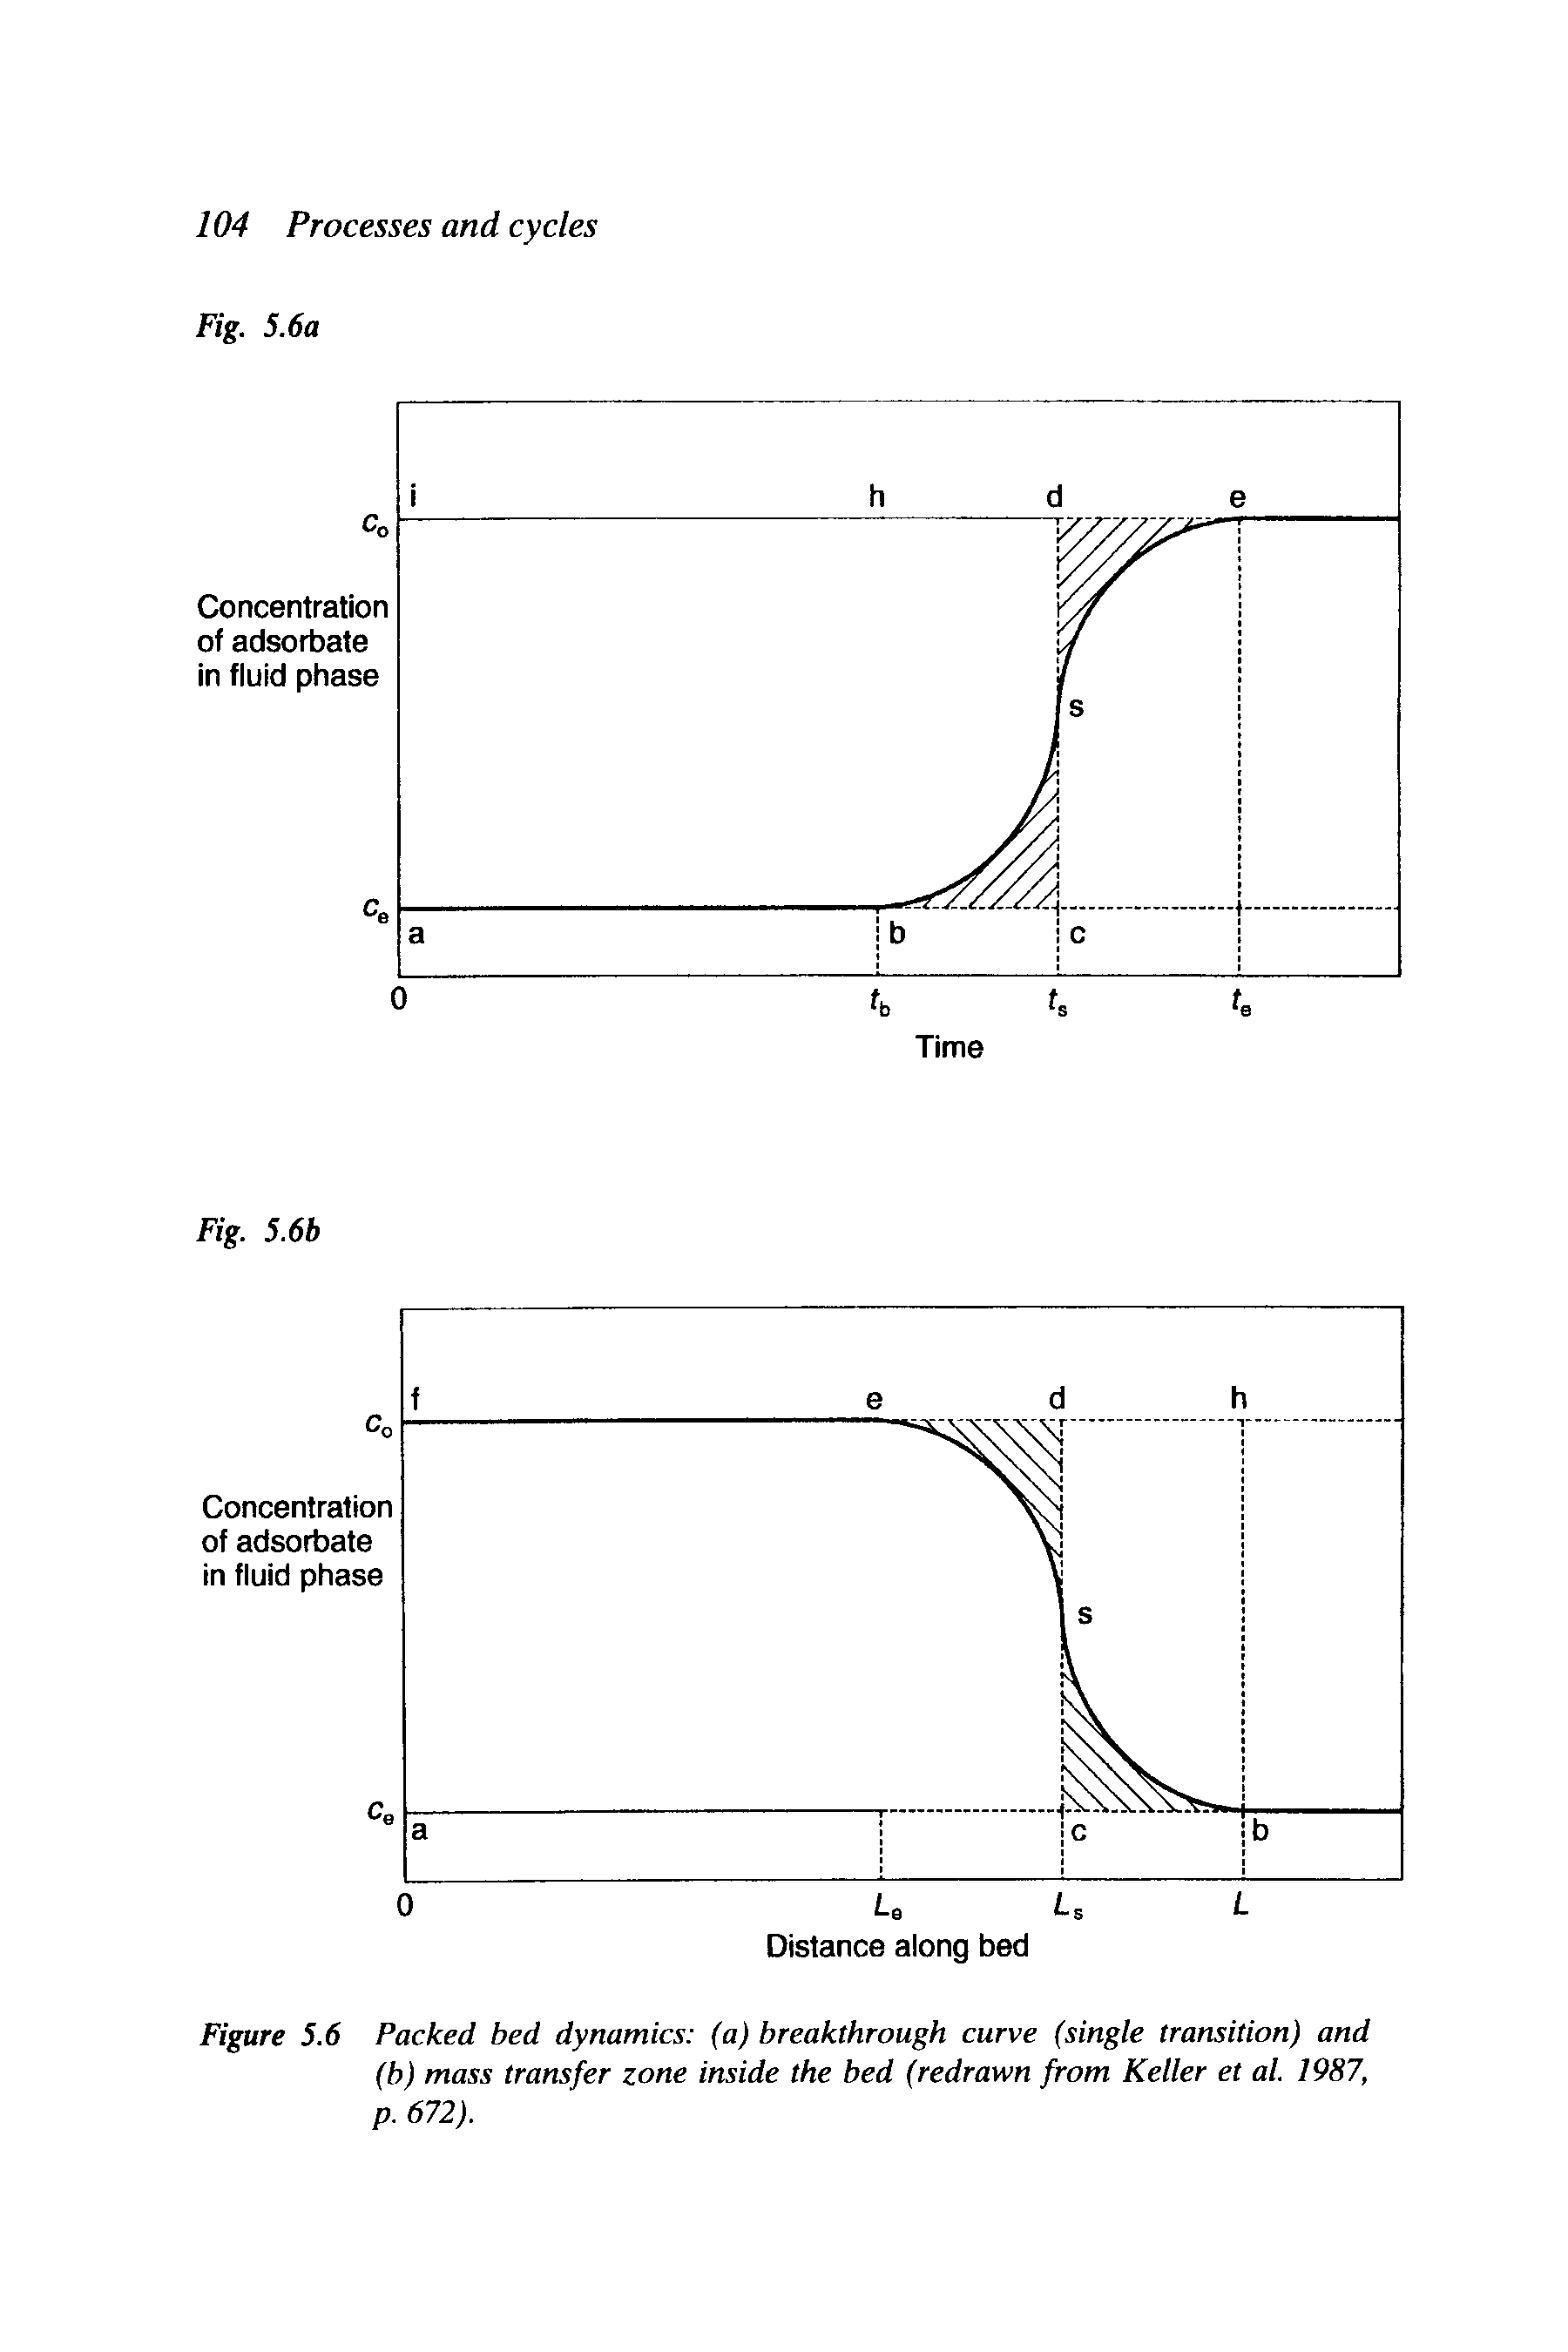 Figure 5.6 Packed bed dynamics (a) breakthrough curve (single transition) and (b) mass transfer zone inside the bed (redrawn from Keller et al. 1987, p. 672).